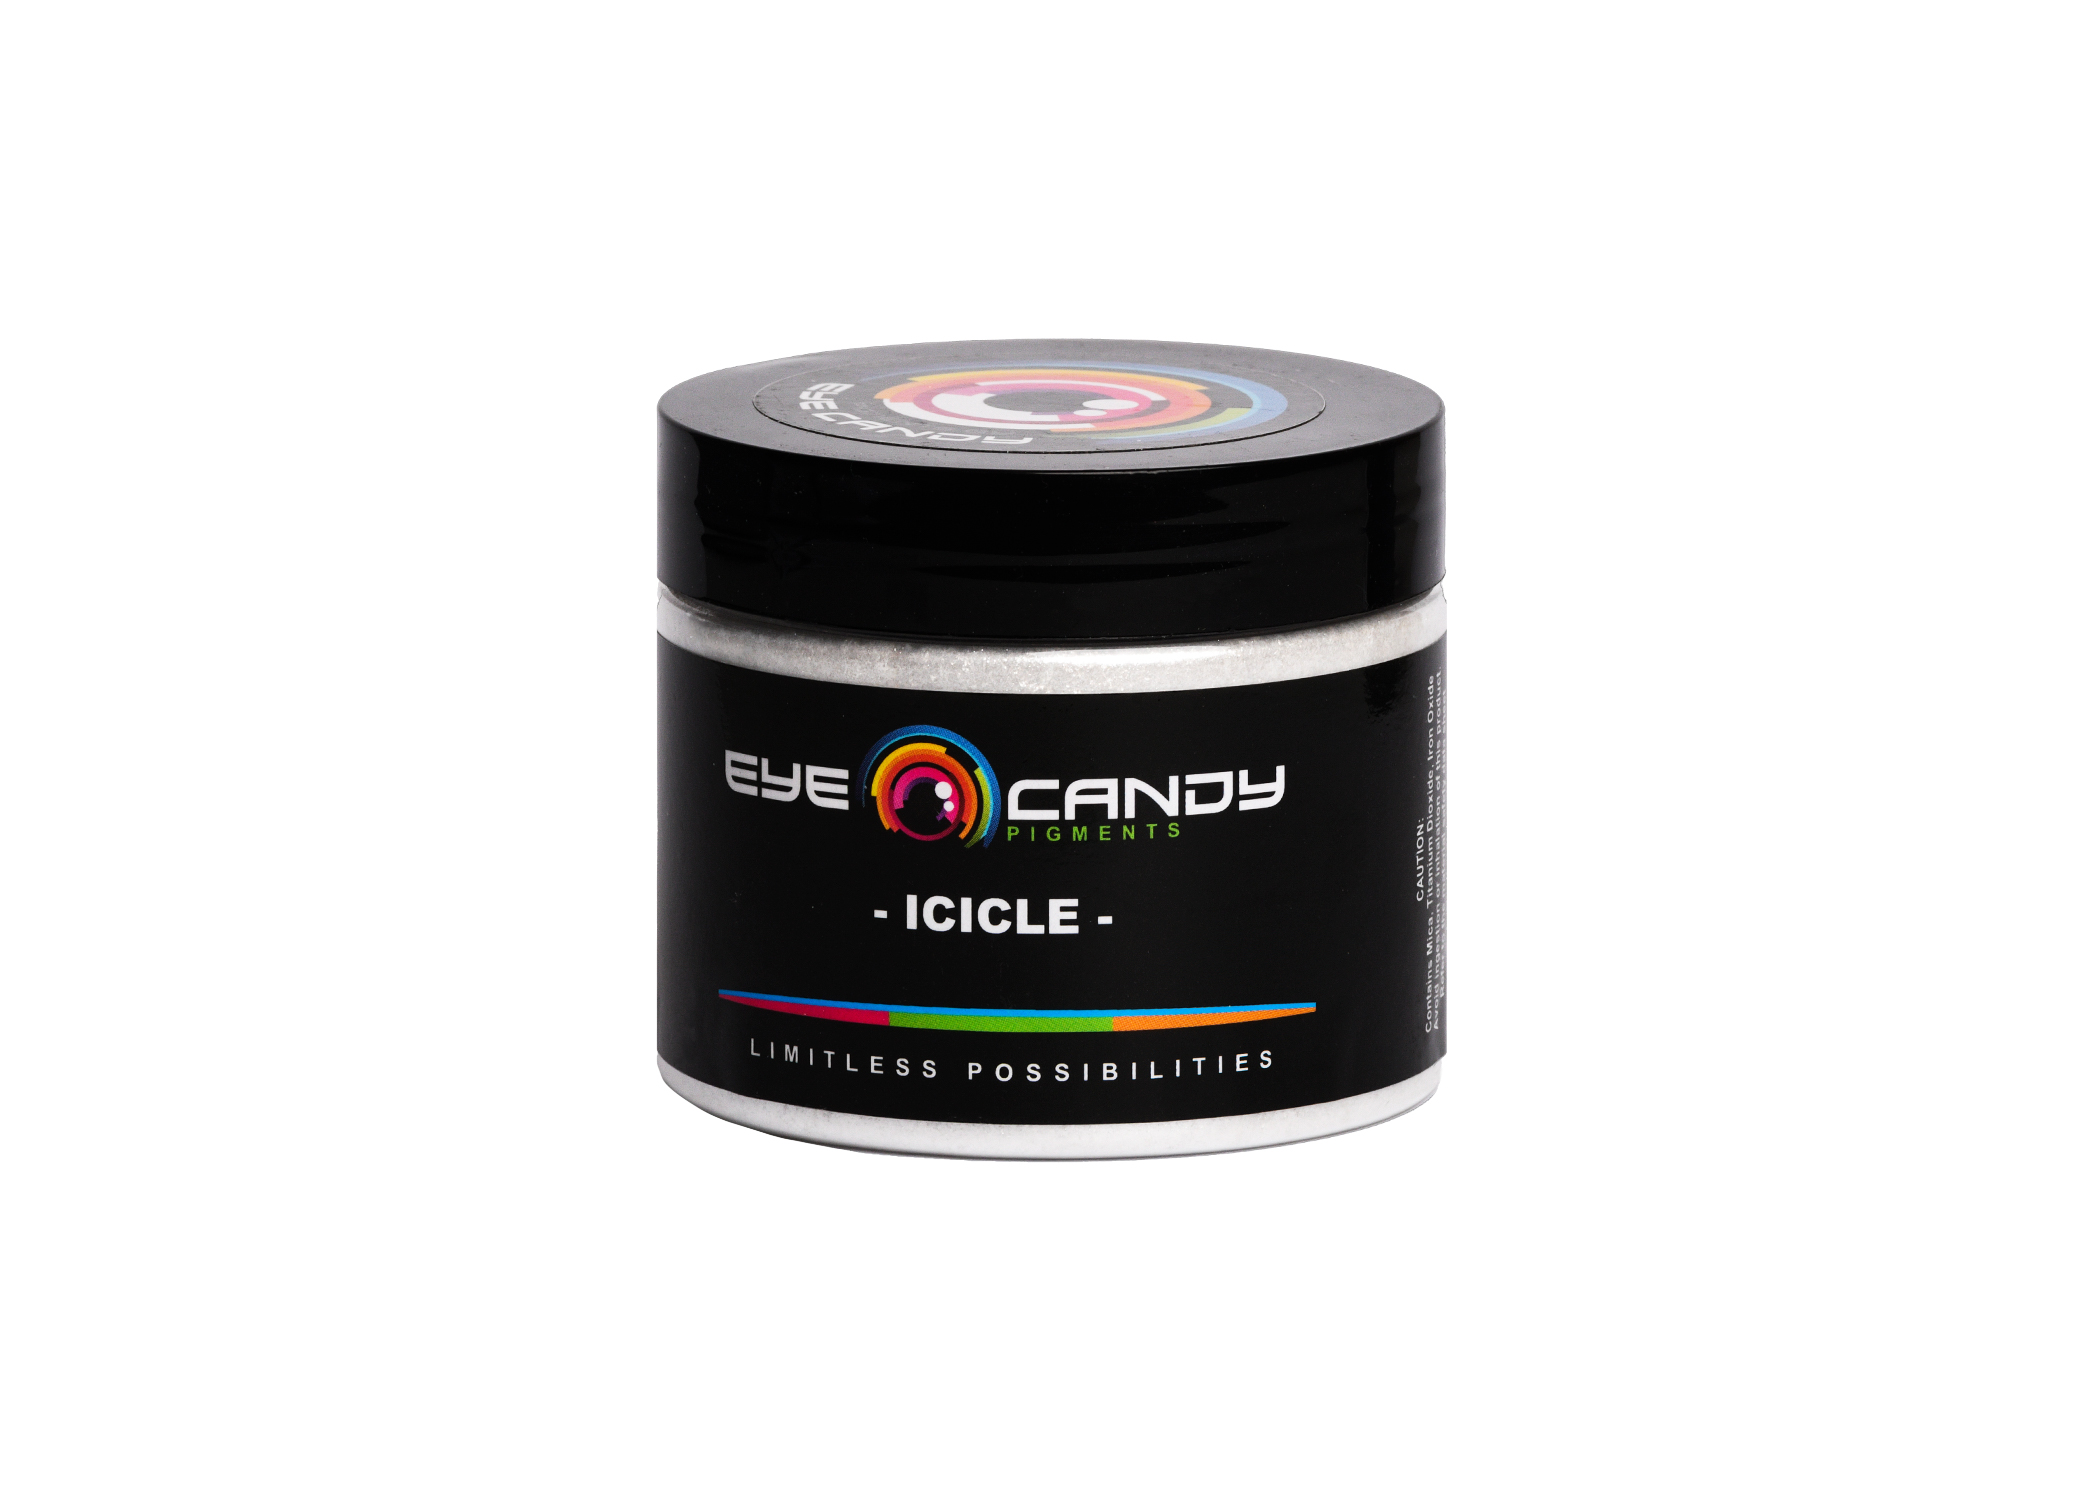 Eye Candy Mica Powder Pigment for epoxy resin in Icicle. ( 4oz container)